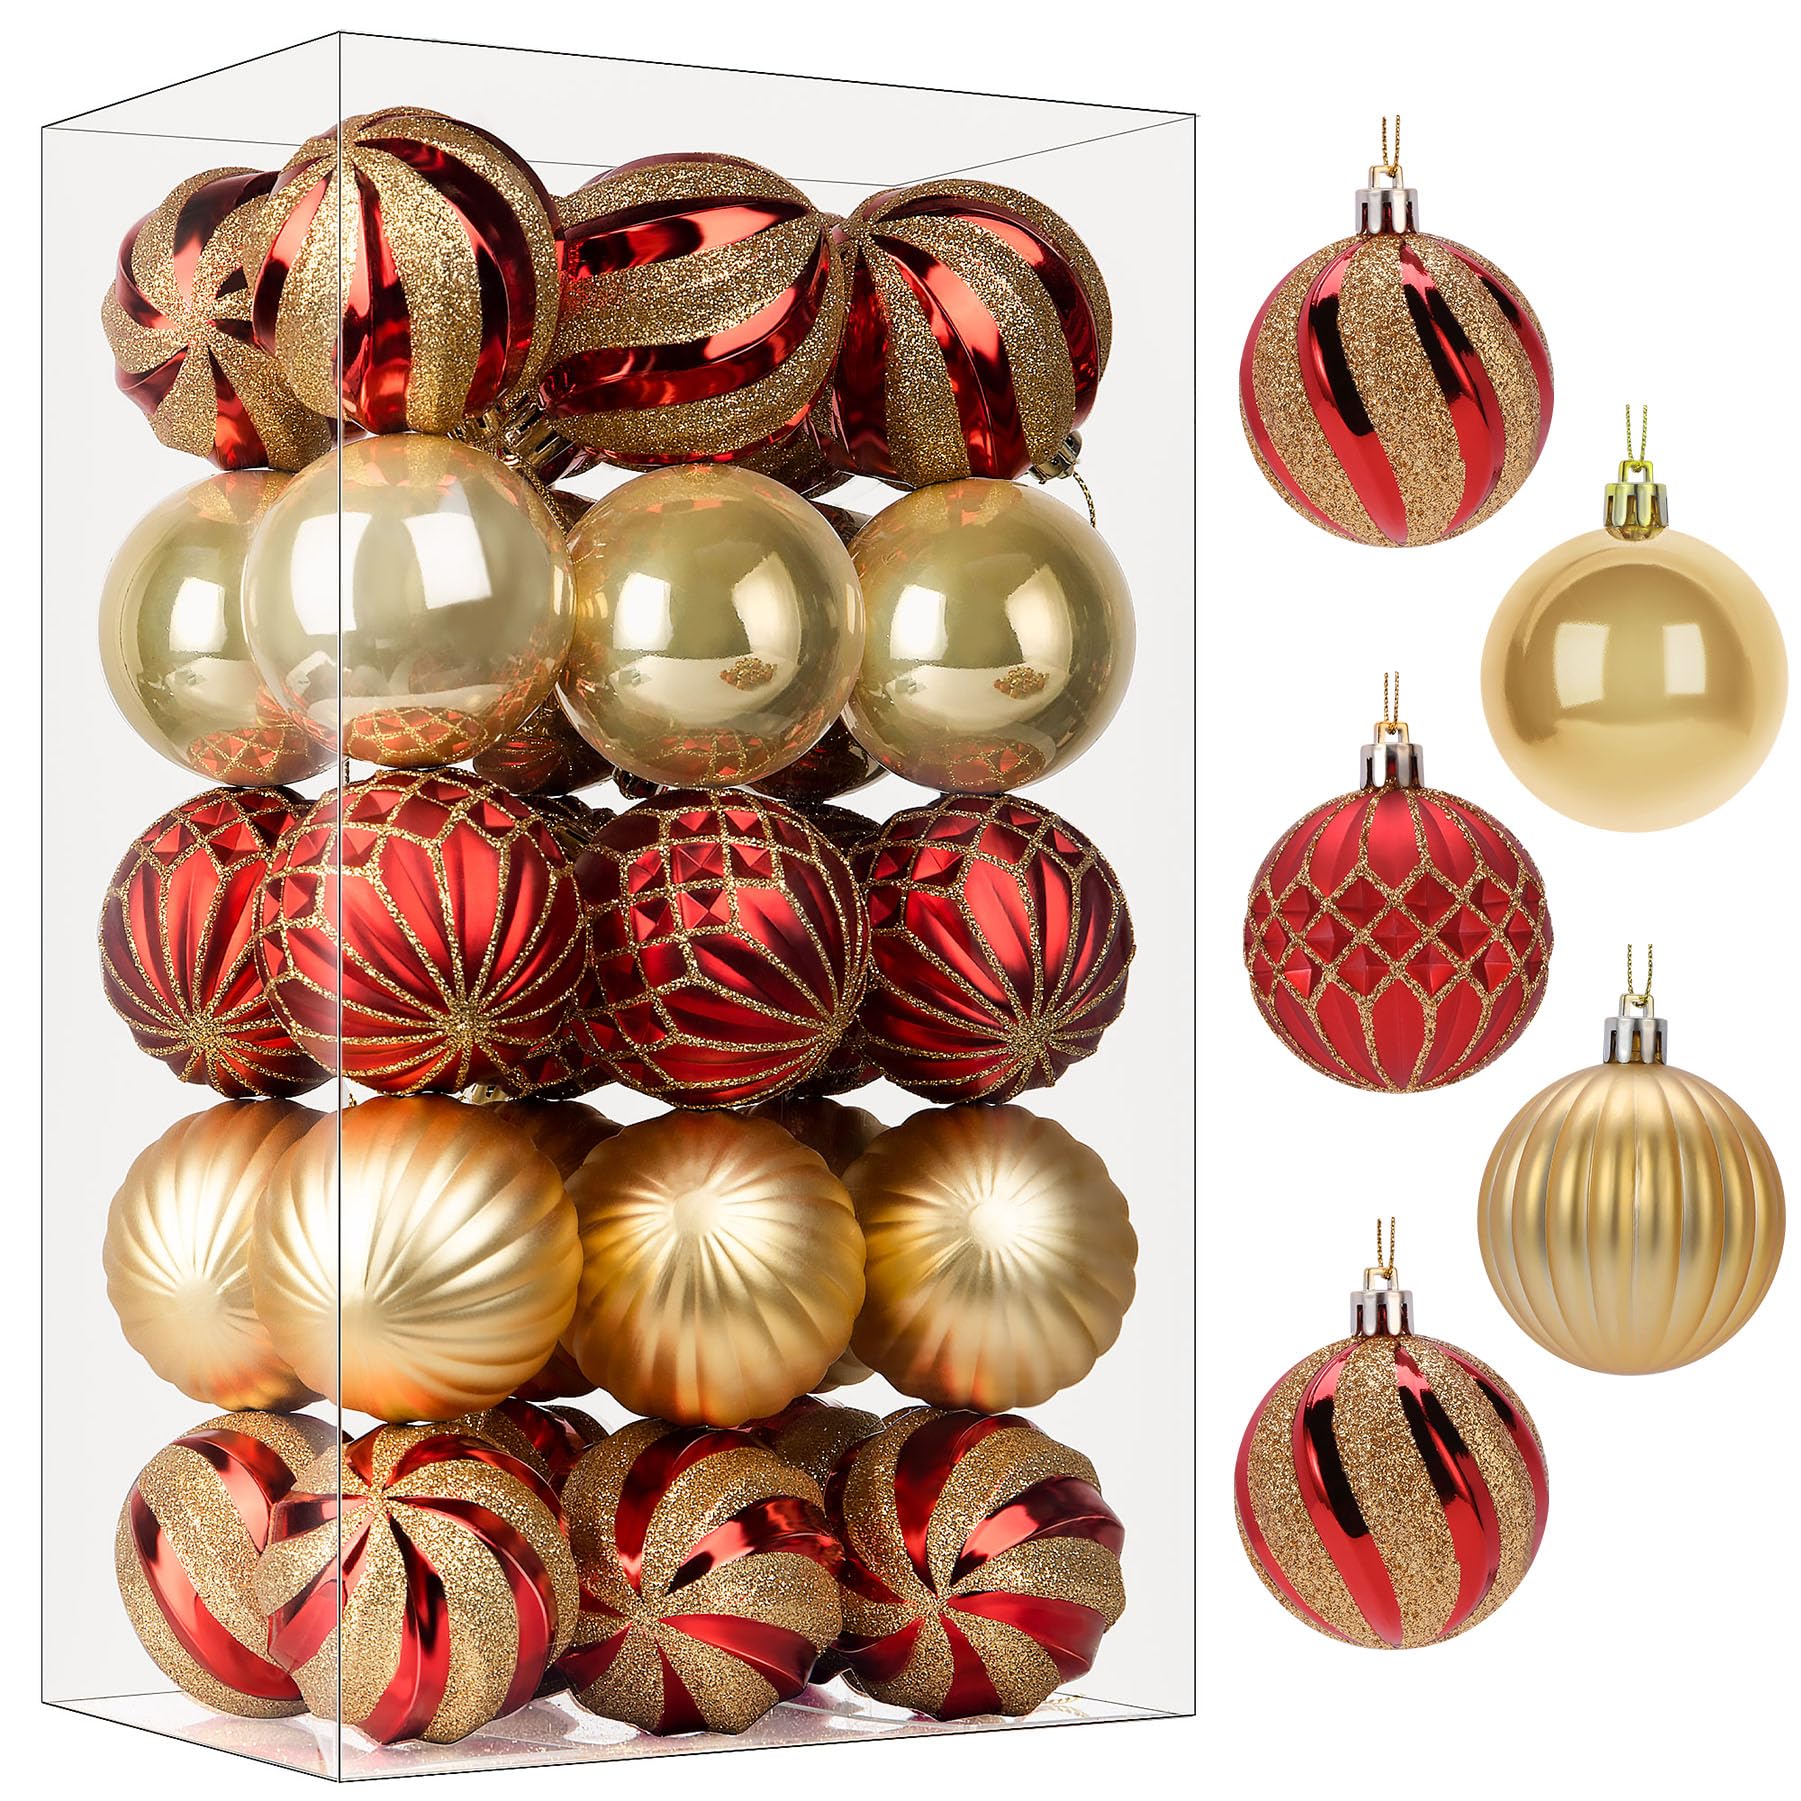 Burgundy and Gold Christmas Decor - The Lilypad Cottage